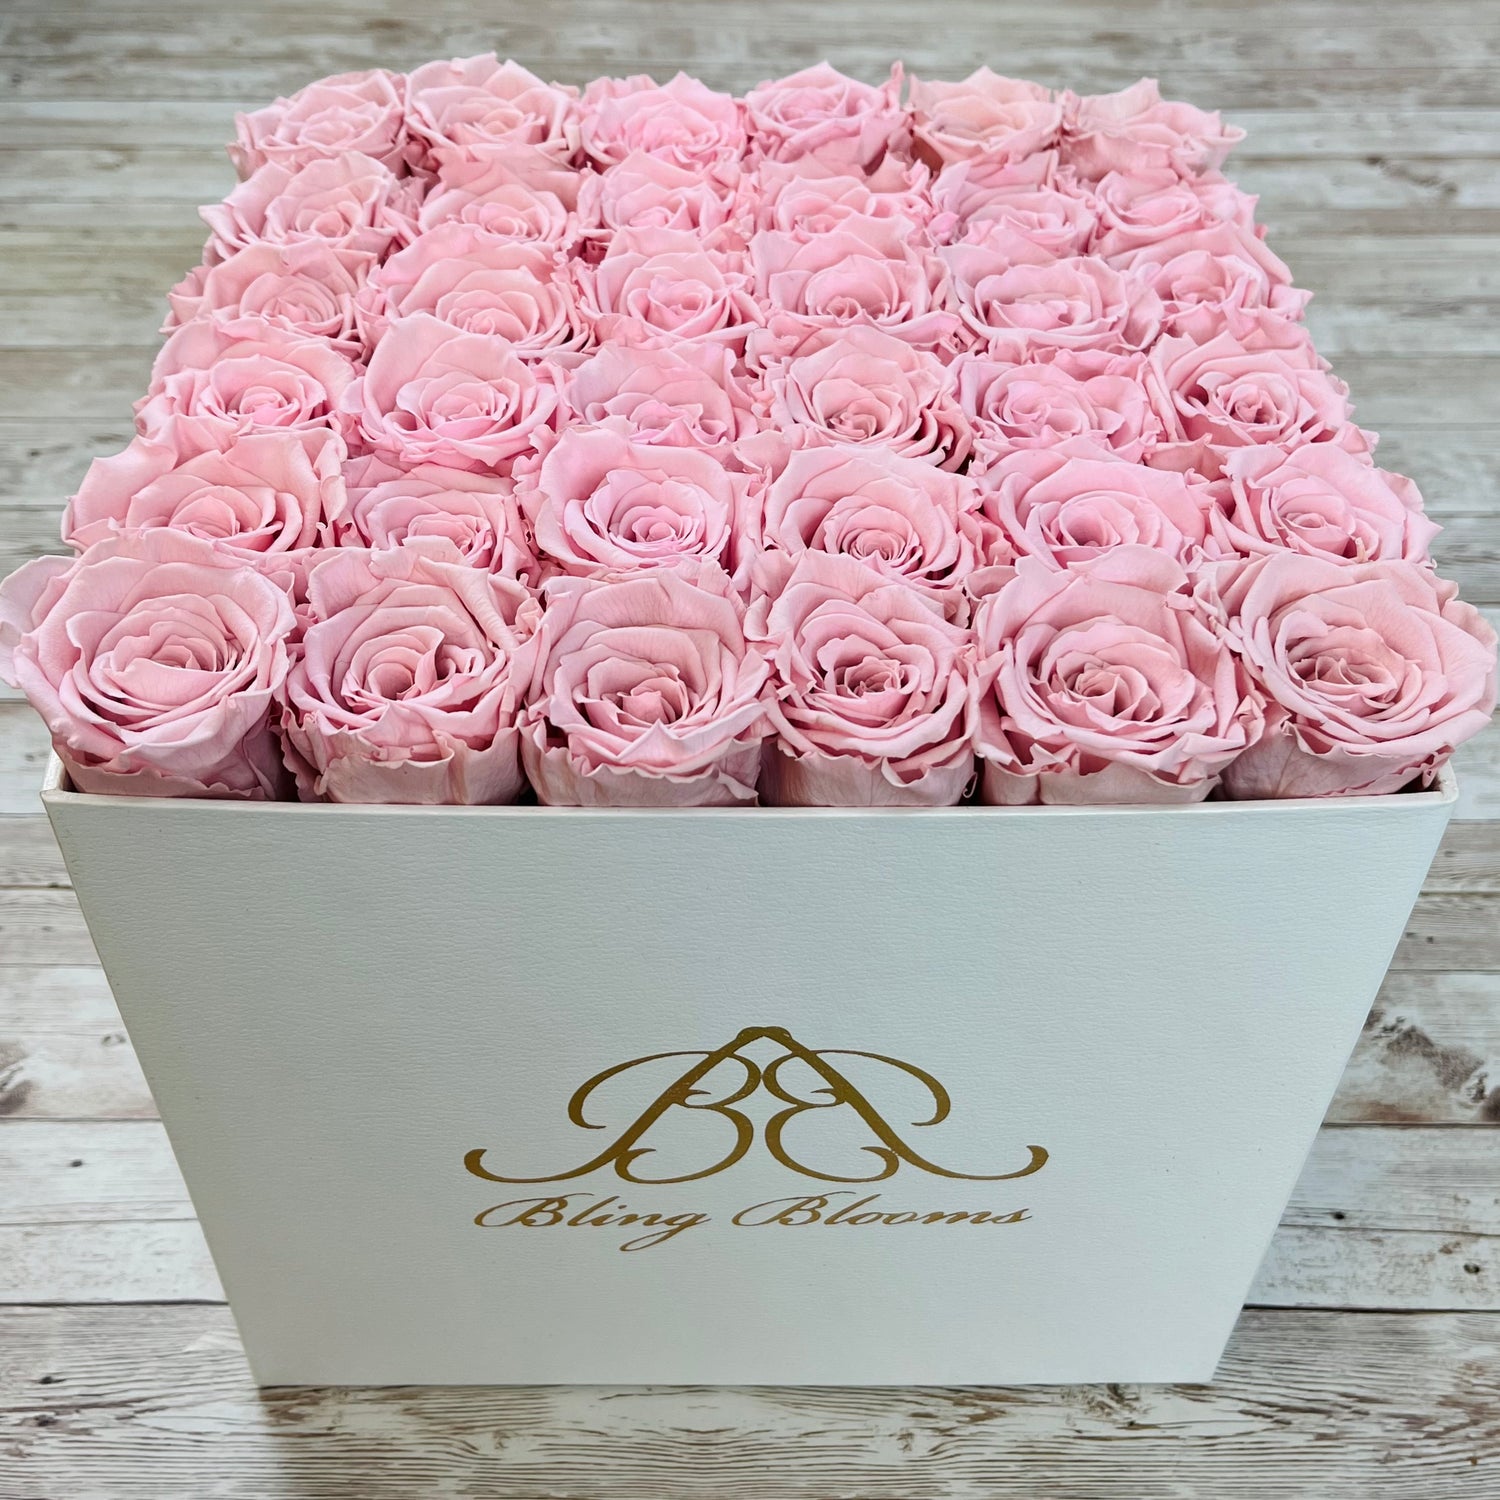 White Square Bloom Box | Pink Infinity Roses | Bling Blooms